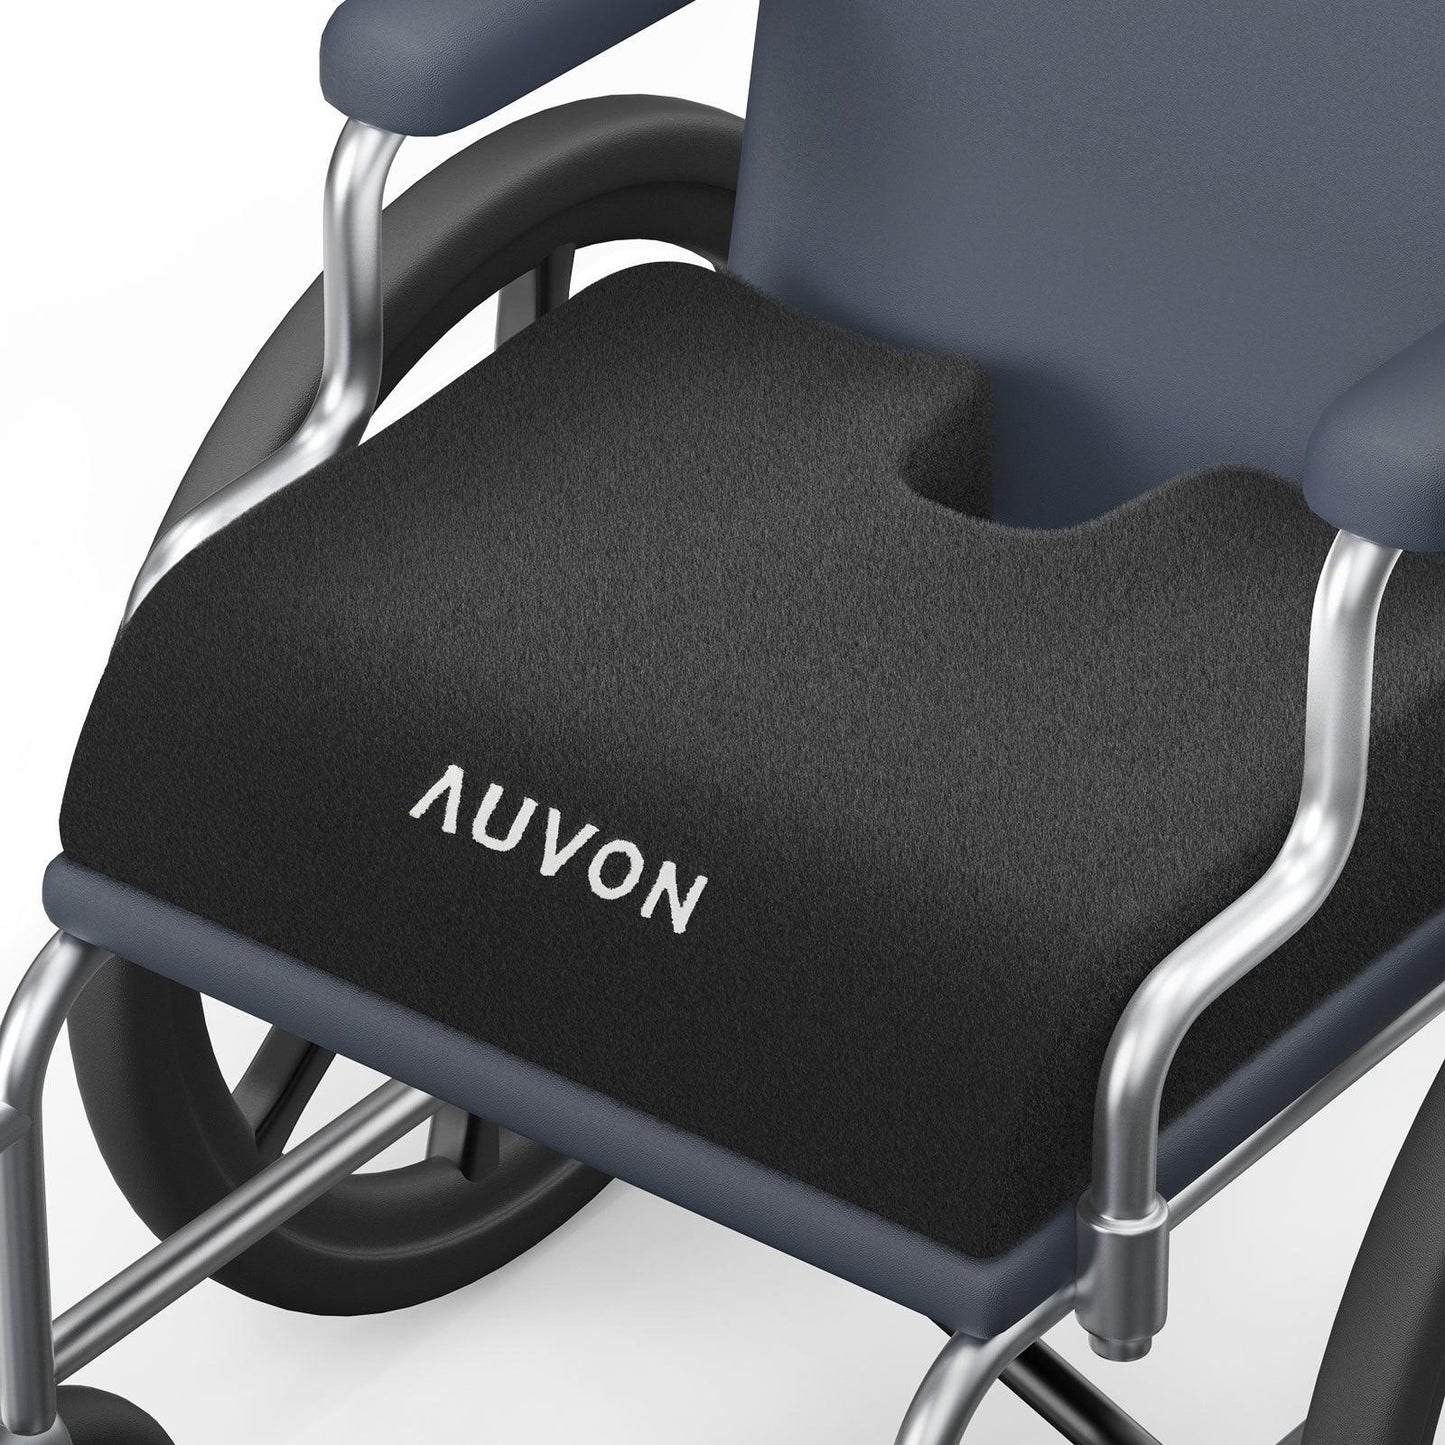 https://auvonhealth.com/cdn/shop/files/auvon-wheelchair-seat-cushions-18-x16-x3-for-sciatica-back-coccyx-pressure-sore-and-ulcer-pain-relief-memory-foam-pressure-relief-cushion-with-removable-strap-breathable-and-waterproo.jpg?v=1686019874&width=1445